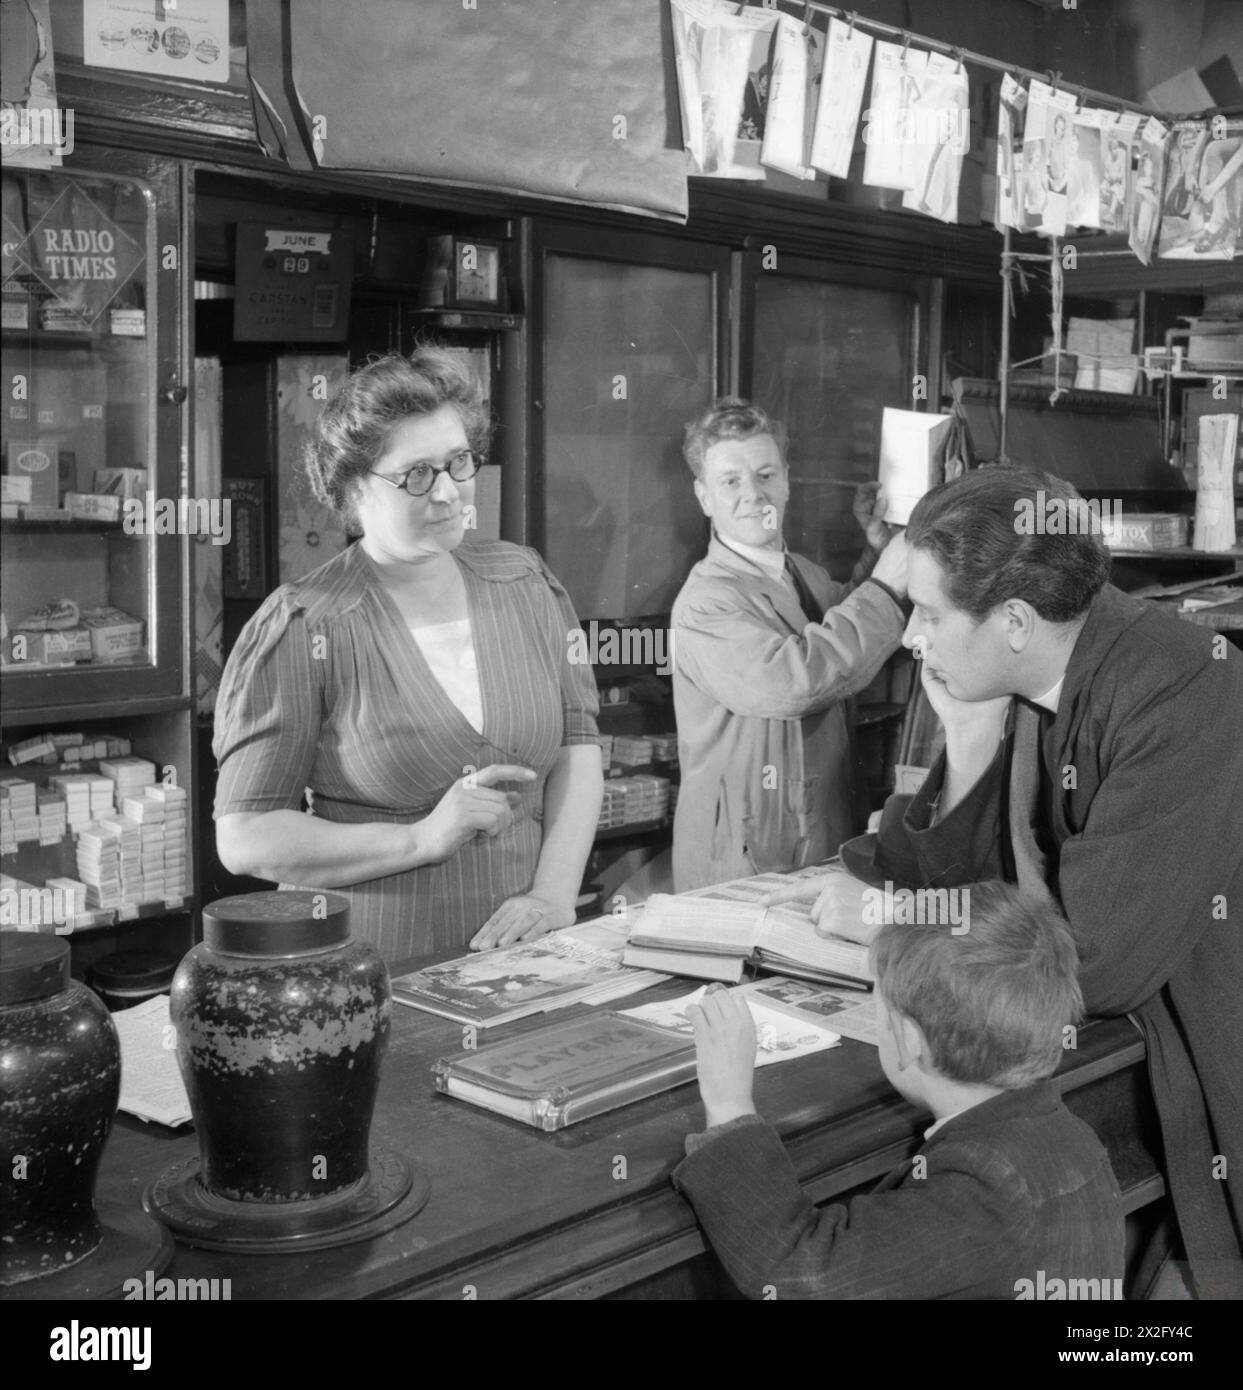 PARISH PRIEST: THE WORK OF THE VICAR OF ST MARK'S CHURCH, VICTORIA DOCKS, SILVERTOWN, LONDON, ENGLAND, UK, 1944 - Reverend Joseph Stephens runs through the music for Sunday service with newsagent and church organist Mrs Fry in her shop in Silvertown. A small boy stands next to Rev Stephens as he waits to buy stamps from Mr Fry, who is working behind the counter with his wife Stock Photo